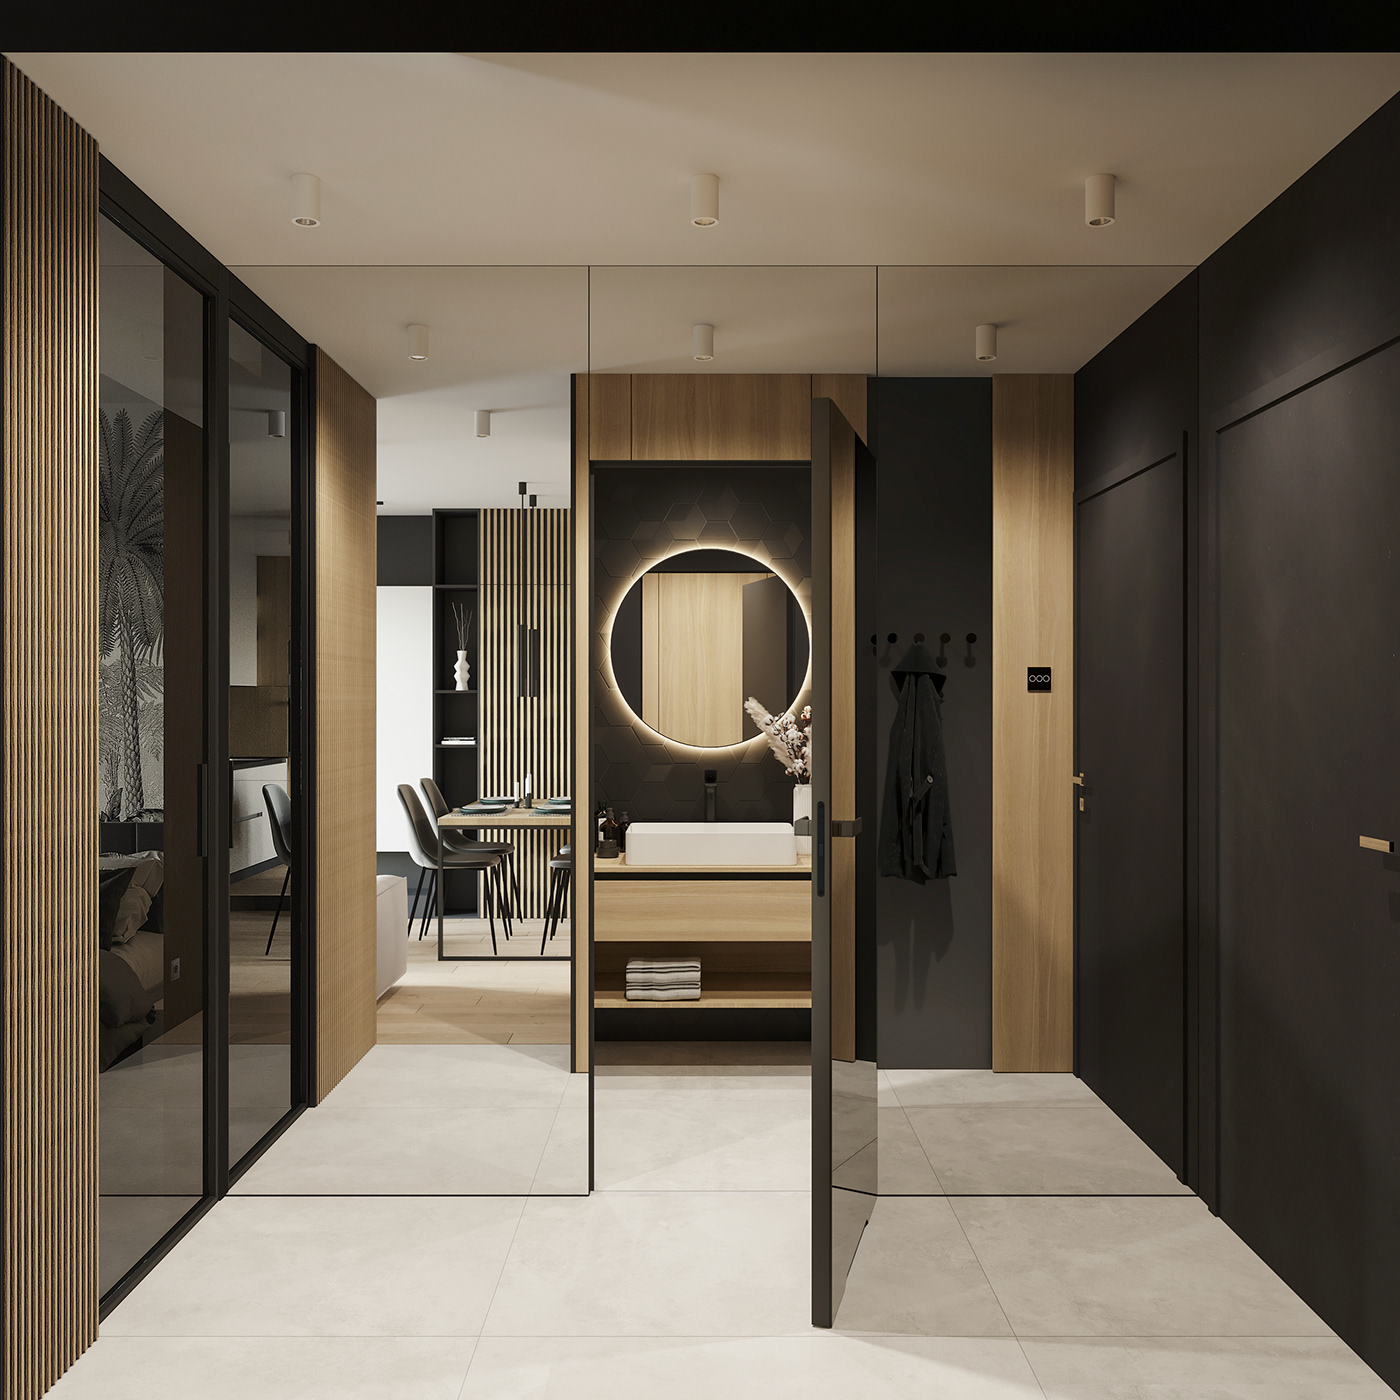 Mirrored doors lead to another space, where privacy is absolutely guaranteed.